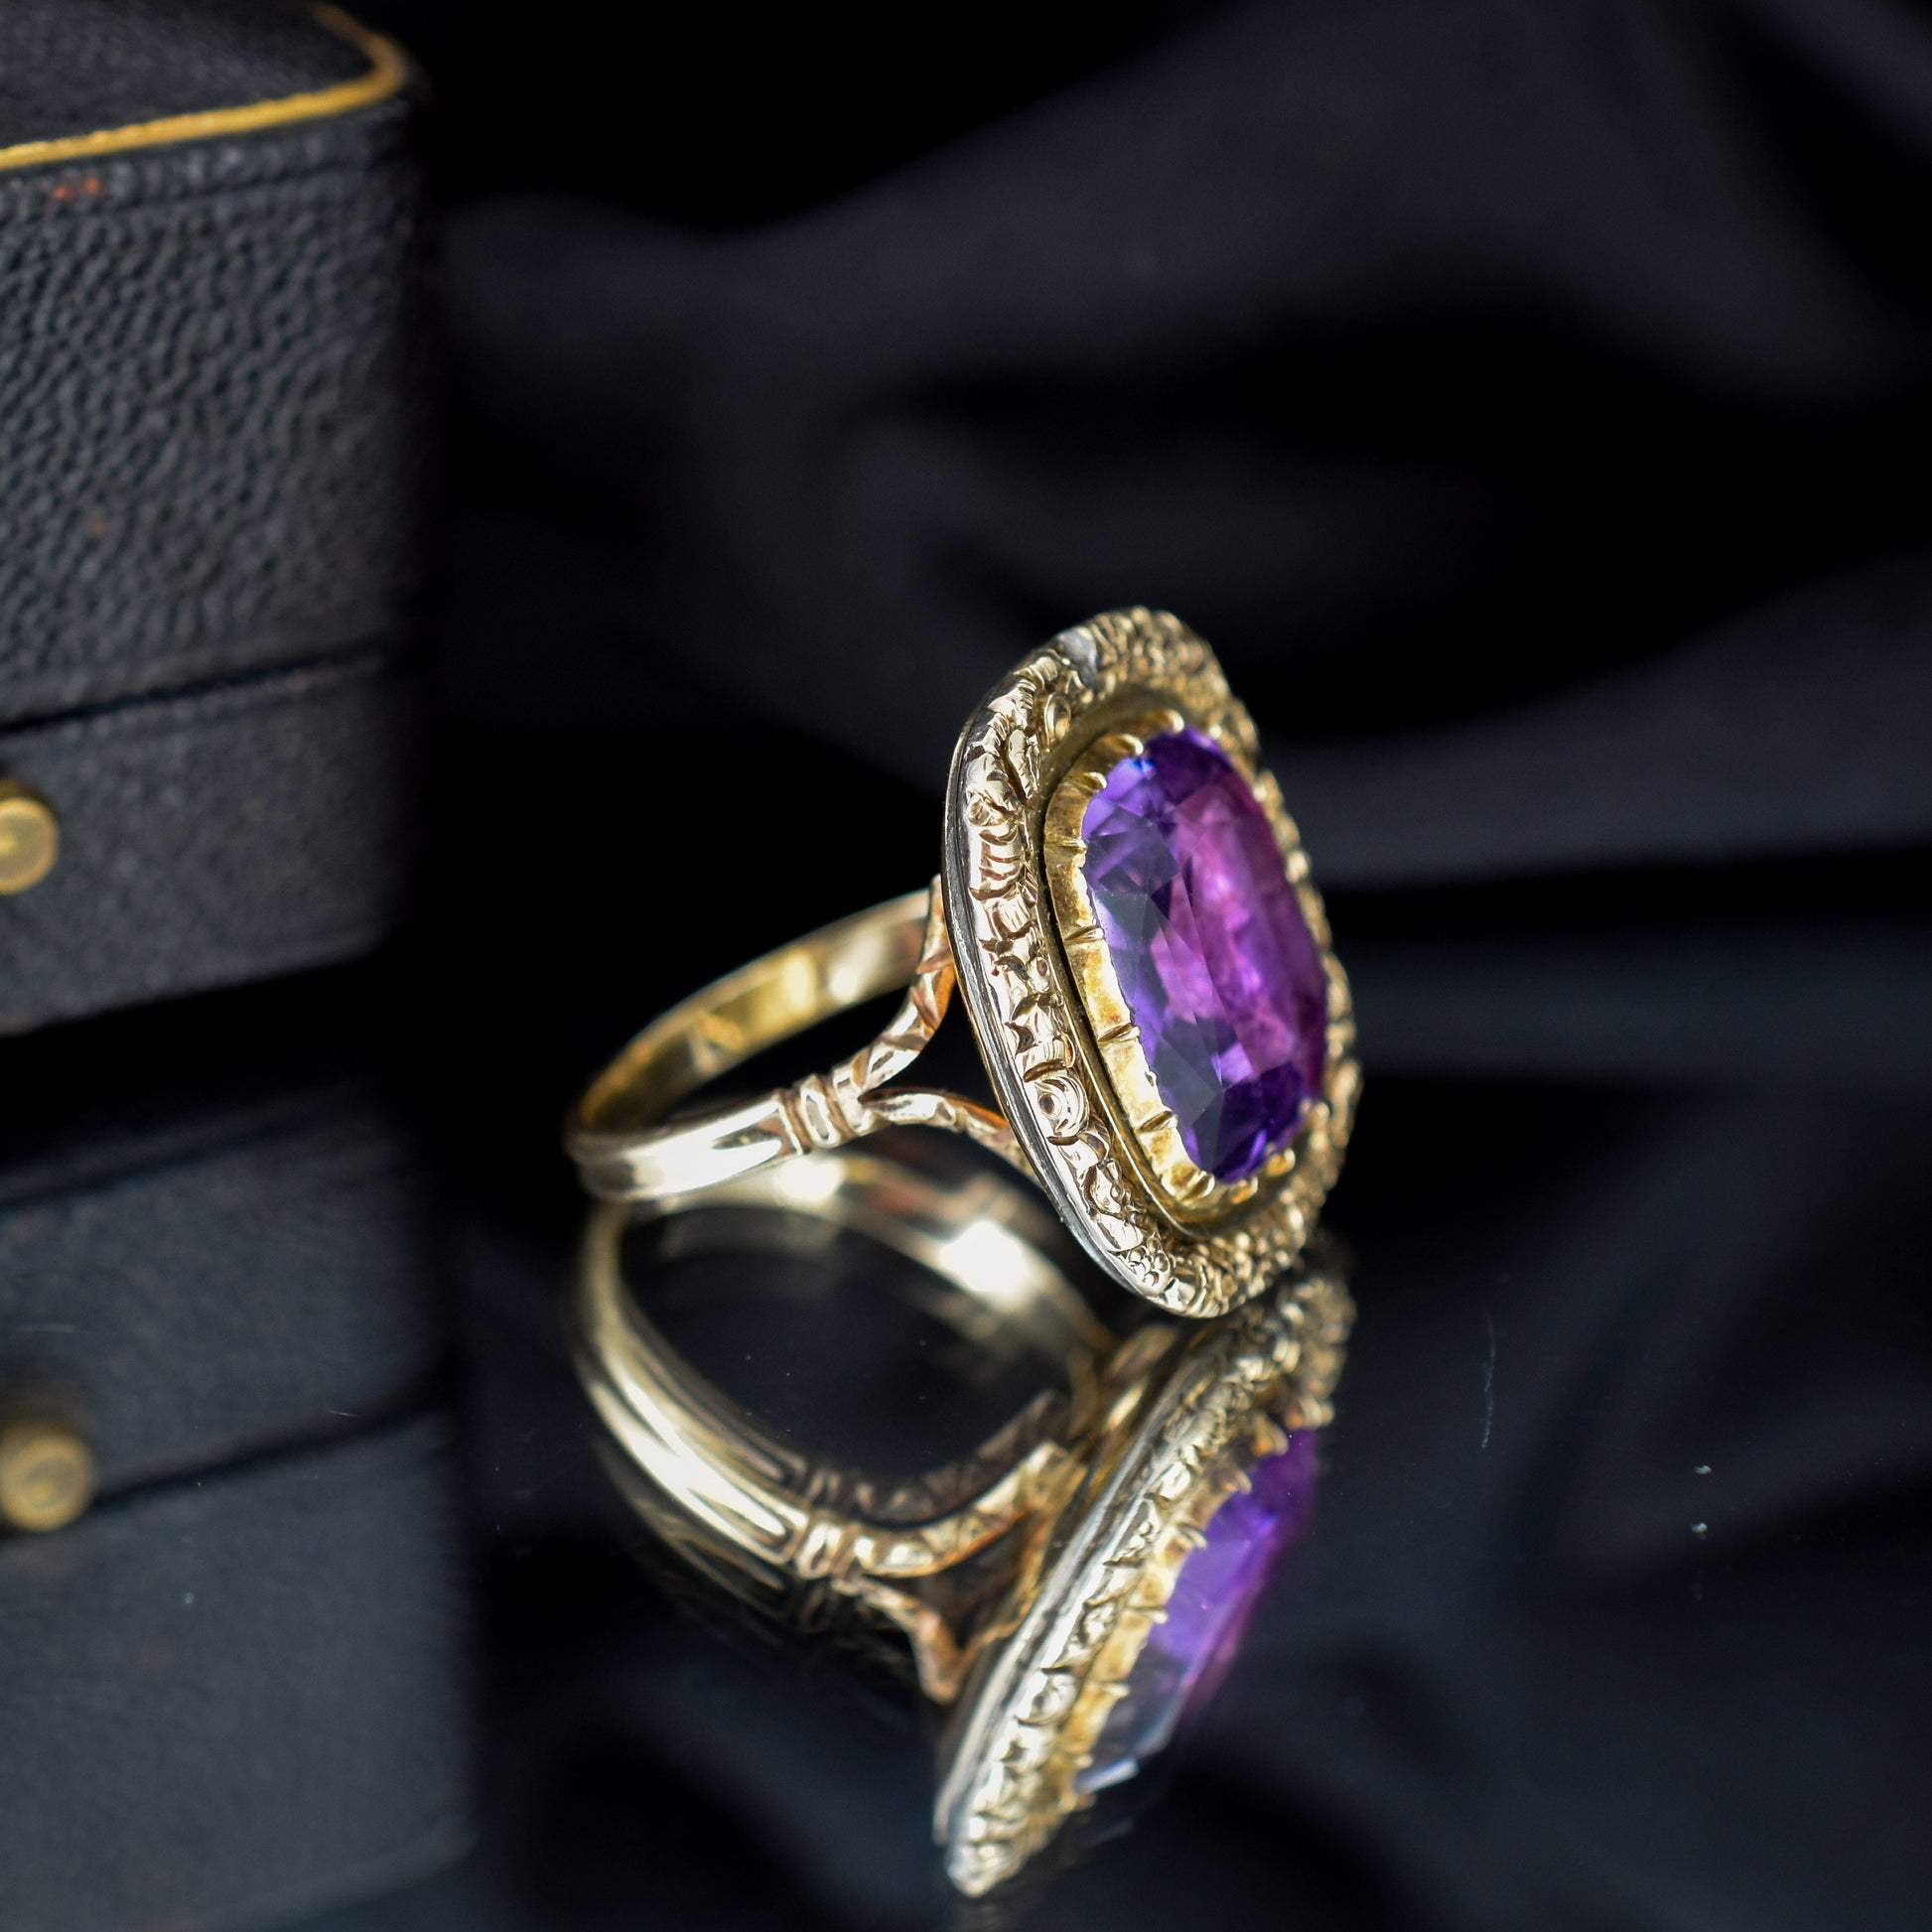 Antique Georgian Amethyst 9ct Gold Foiled Conversion Ring